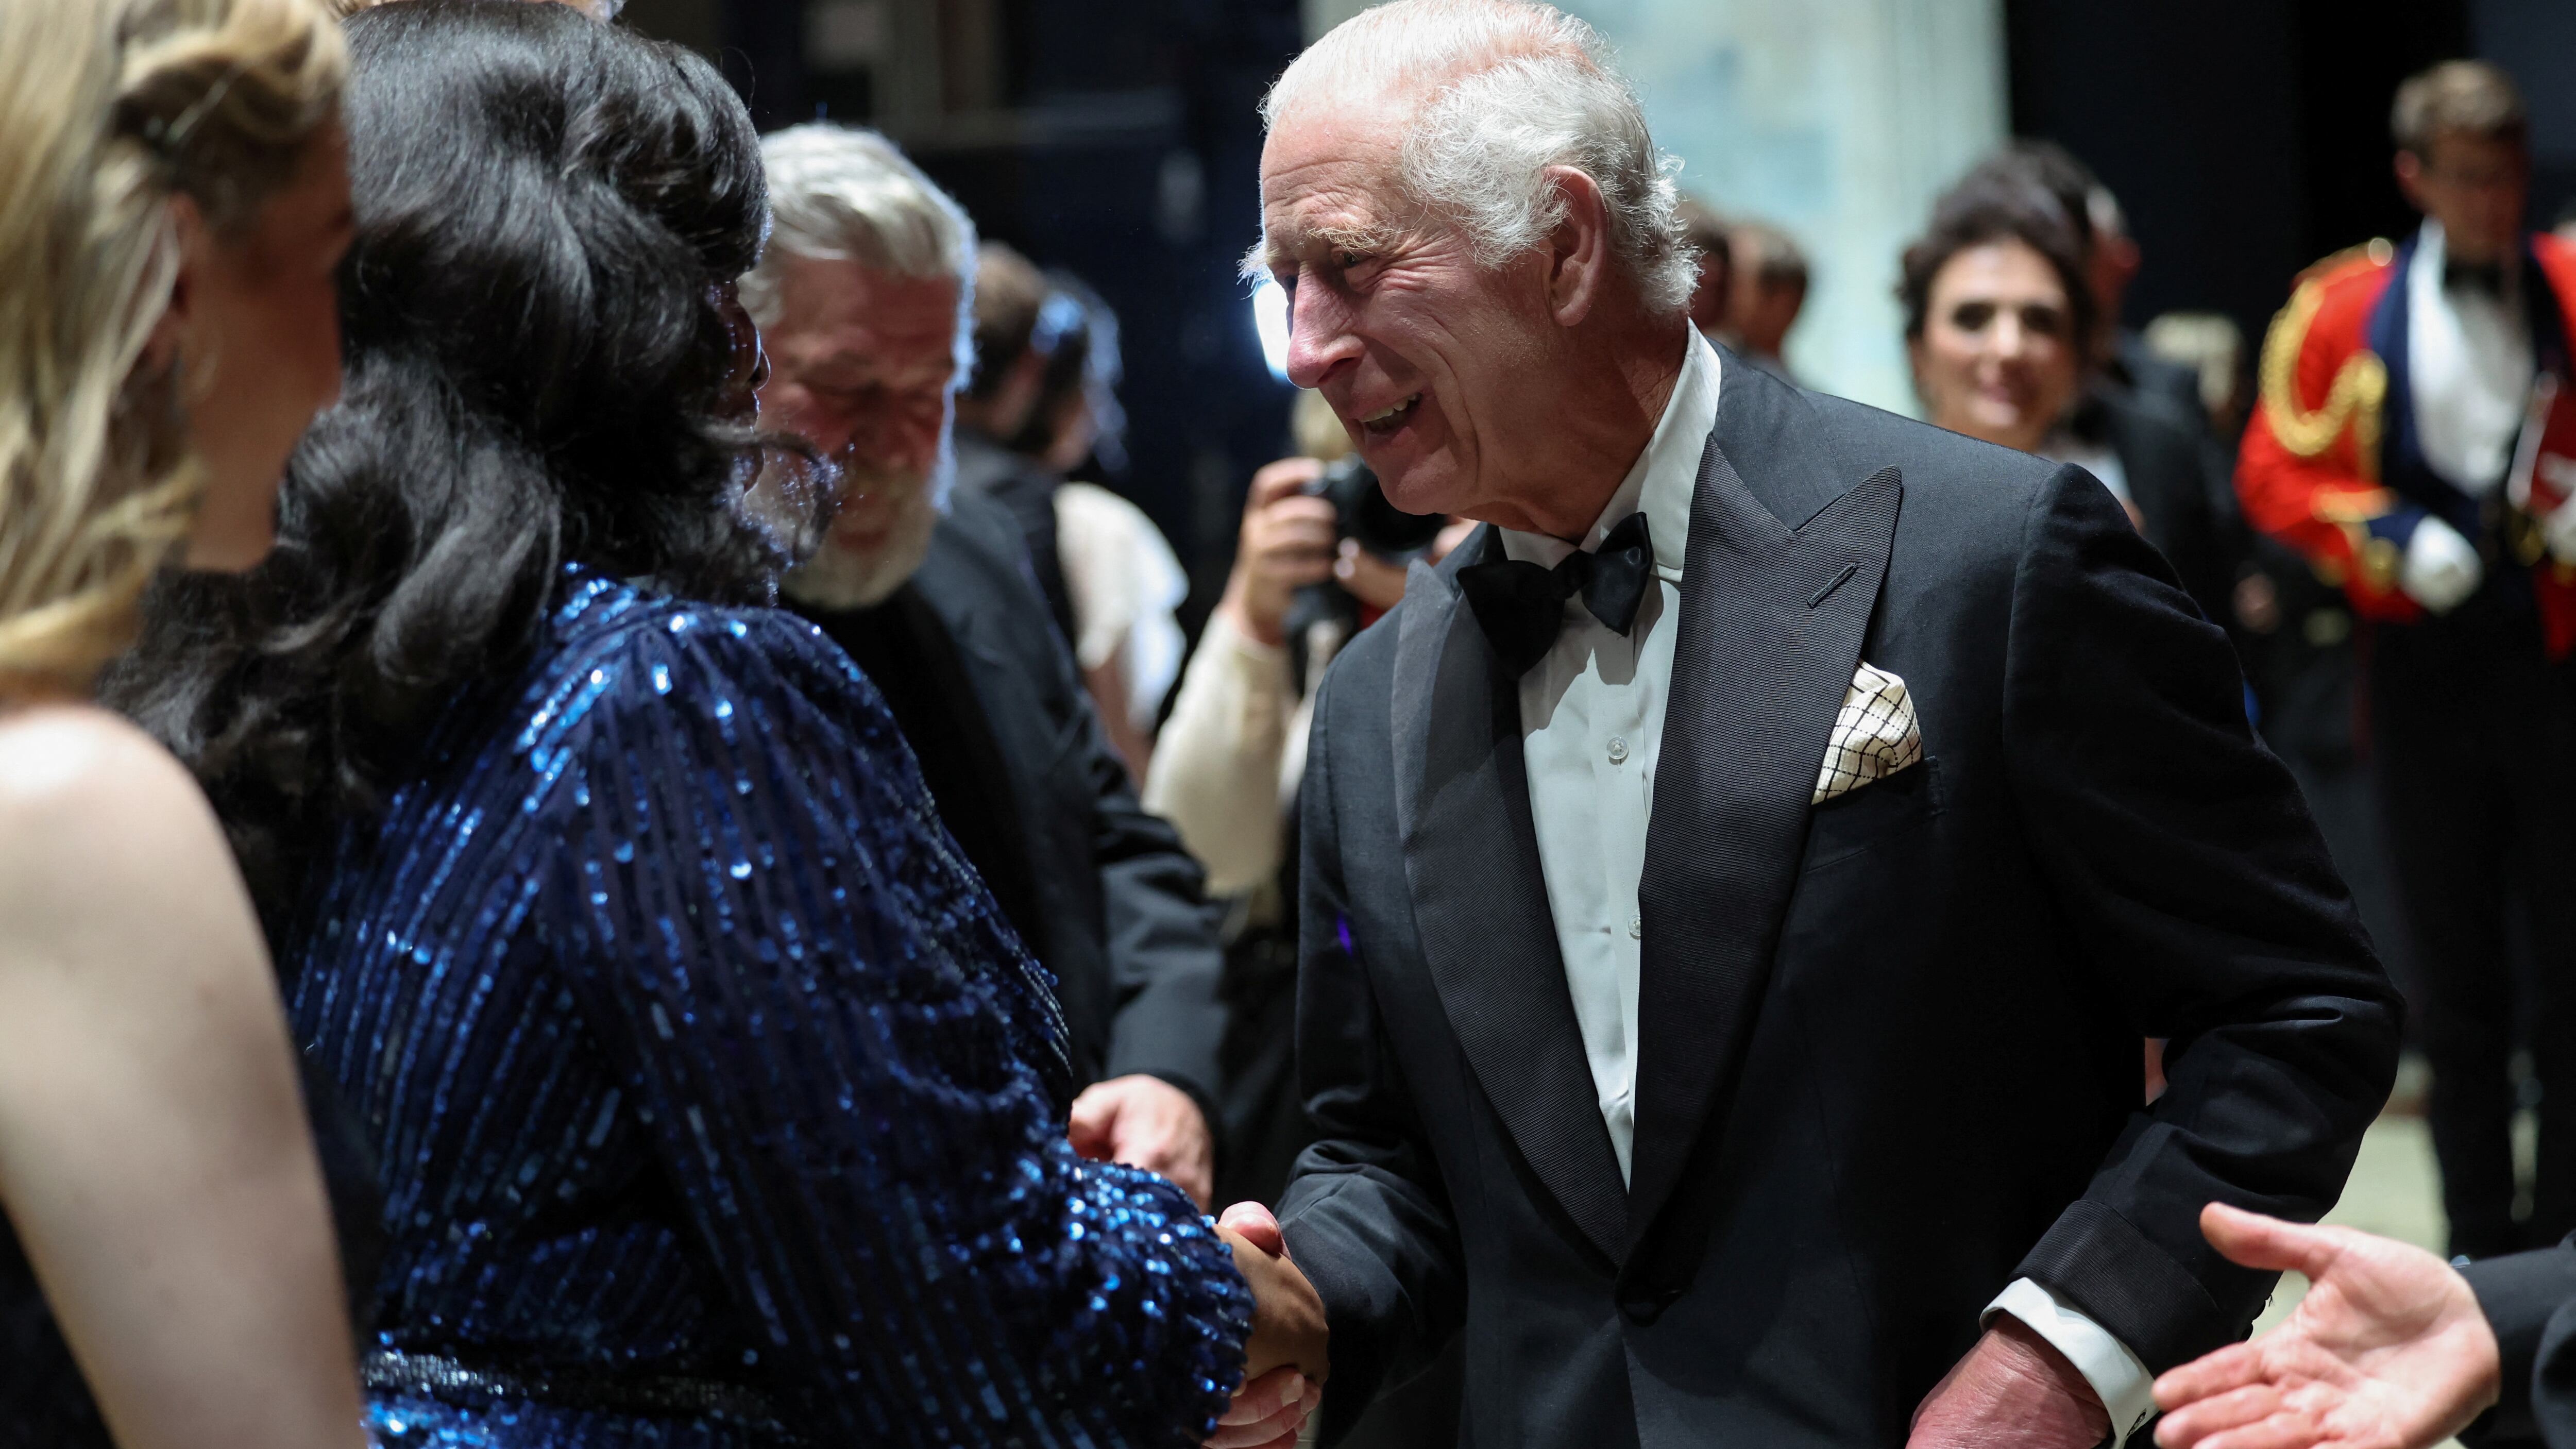 The King meets the cast of the gala performance at the Royal Opera House